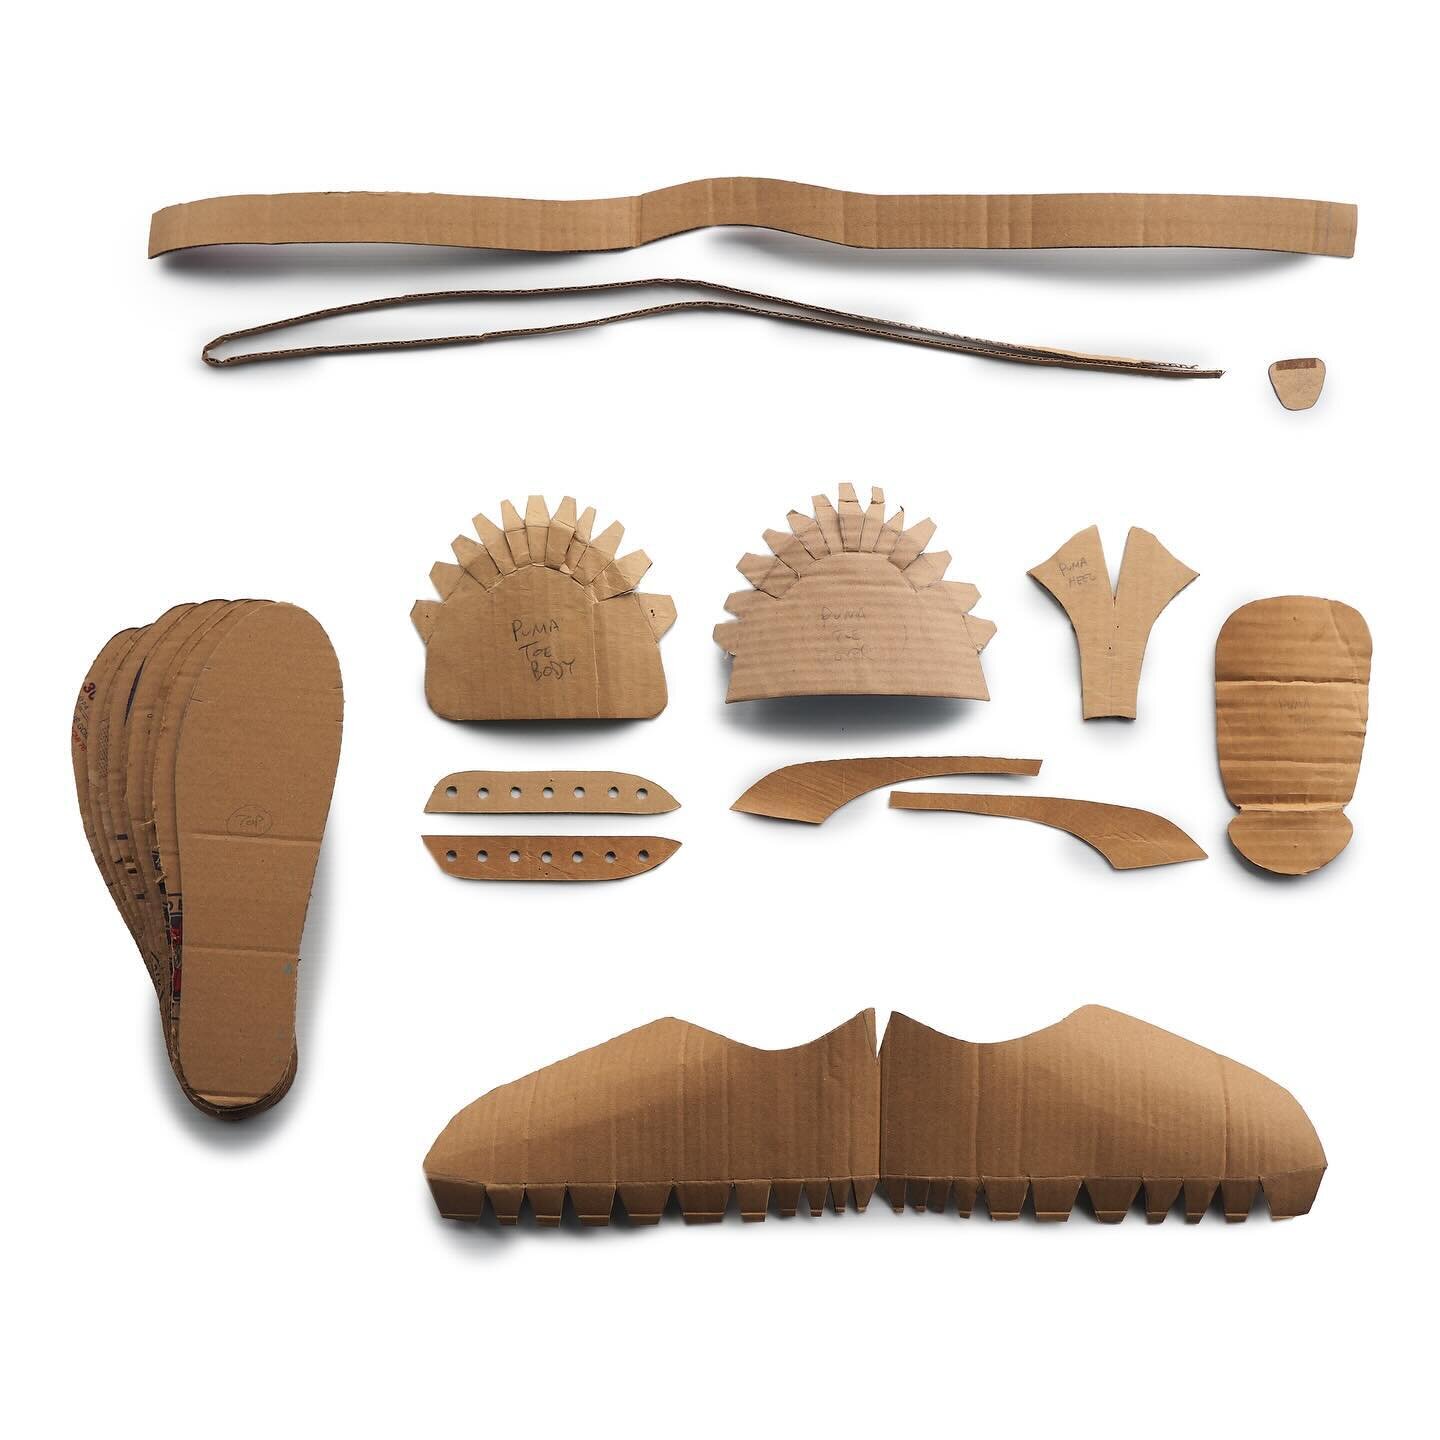 all the pieces you need to make your own cardboard Puma. I&rsquo;m about to release the make-your-own DIY tutorial for this in advance of my upcoming show this summer, where I&rsquo;ll have a bunch of cardboard shoes showing, but not just made from a